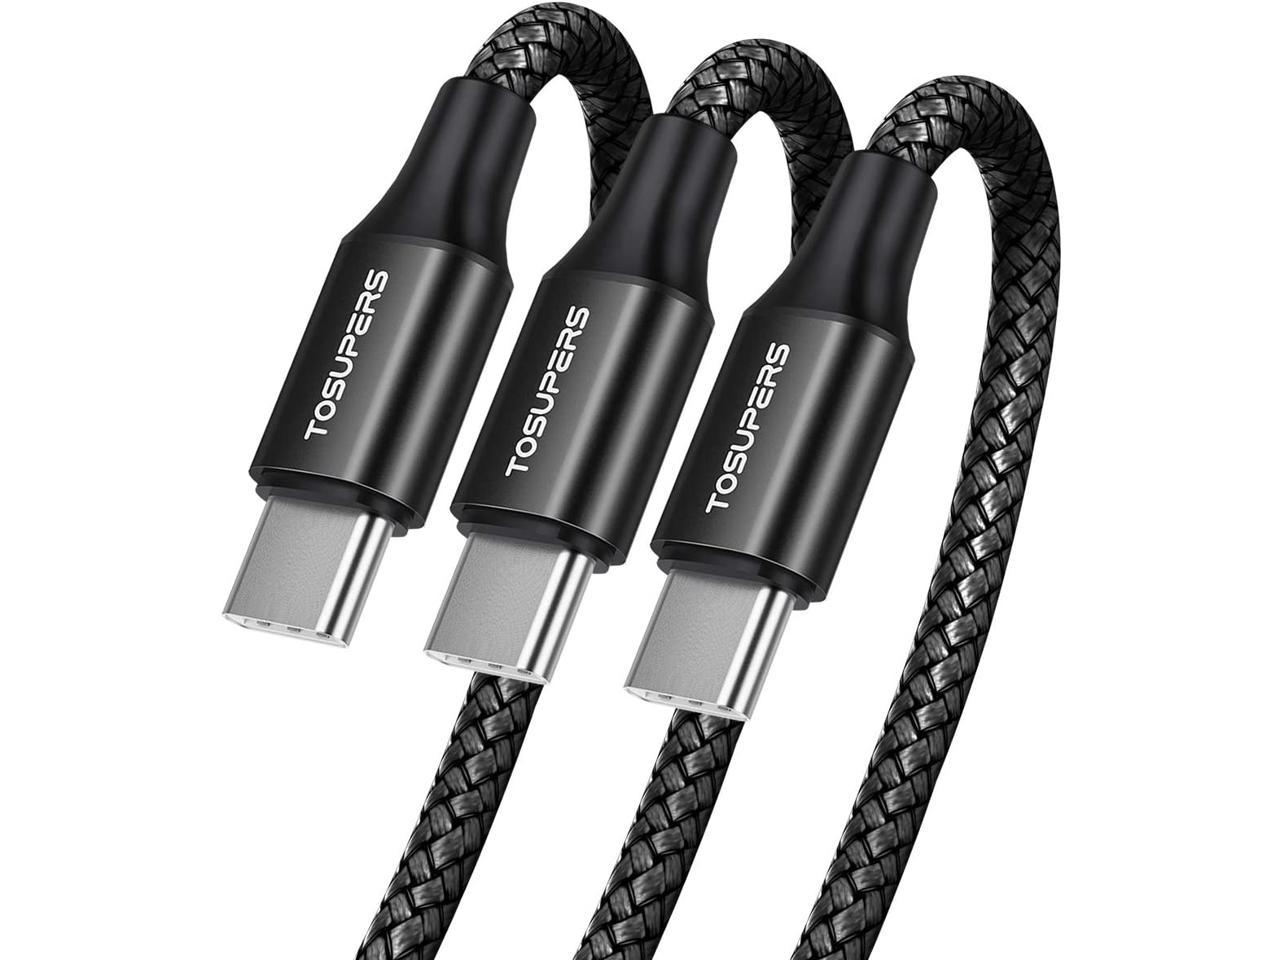 A10e A20 A20e A20s A51 3ft, 2-Pack USB C Cable 3A Fast Charging USB A to C Type Charger Cord Nylon Braided Compatible with Samsung Galaxy Note 20 Ultra 5G 10 10+ 9 S20 S10 S10e S9 Plus Z Flip 